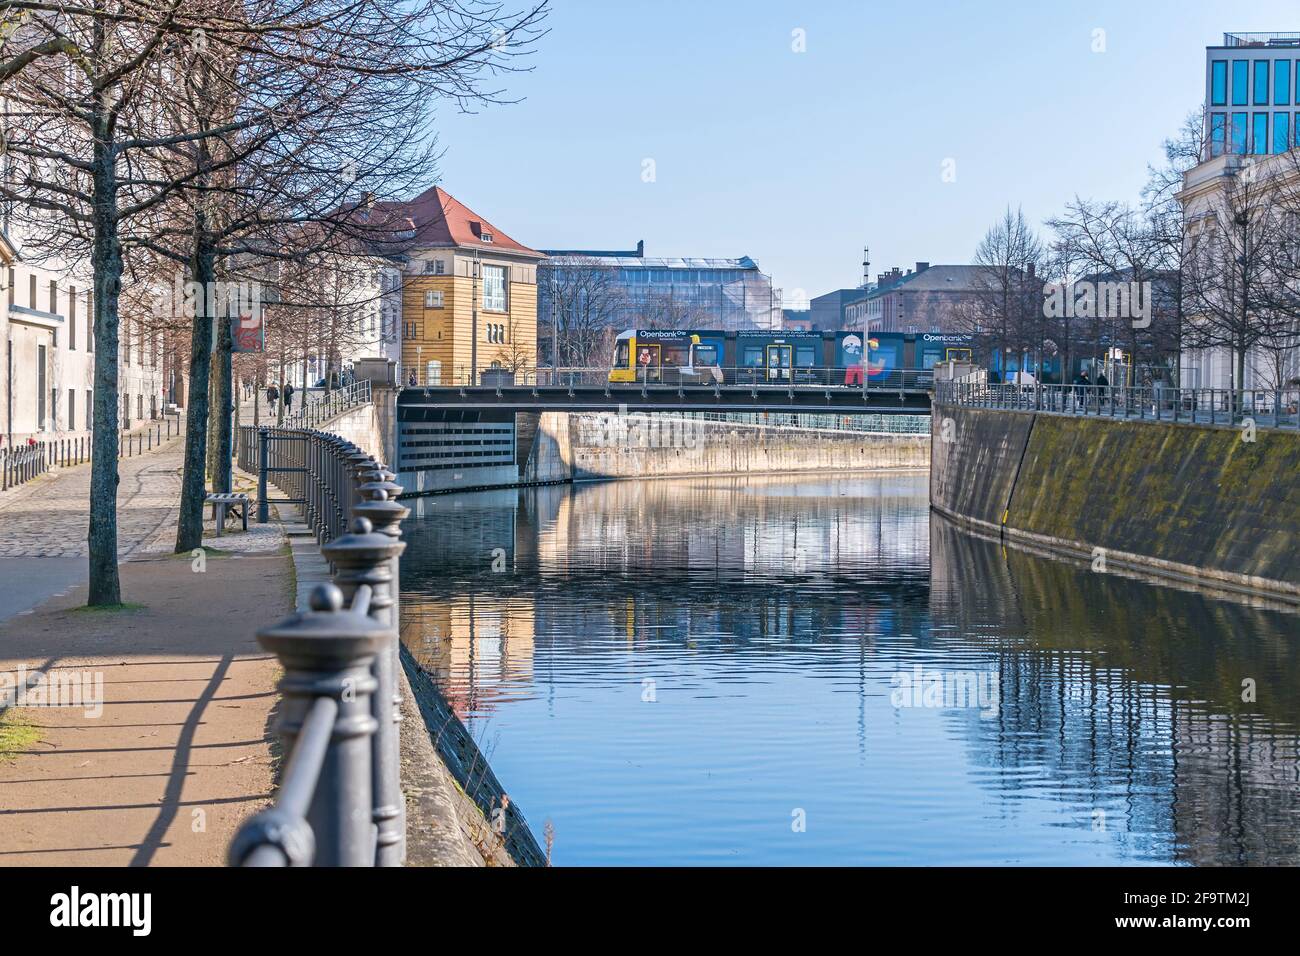 Berlin, Germany - March 1, 2021: Banks of the Berlin-Spandau shipping canal with the Sandkrug bridge and the tram Stock Photo